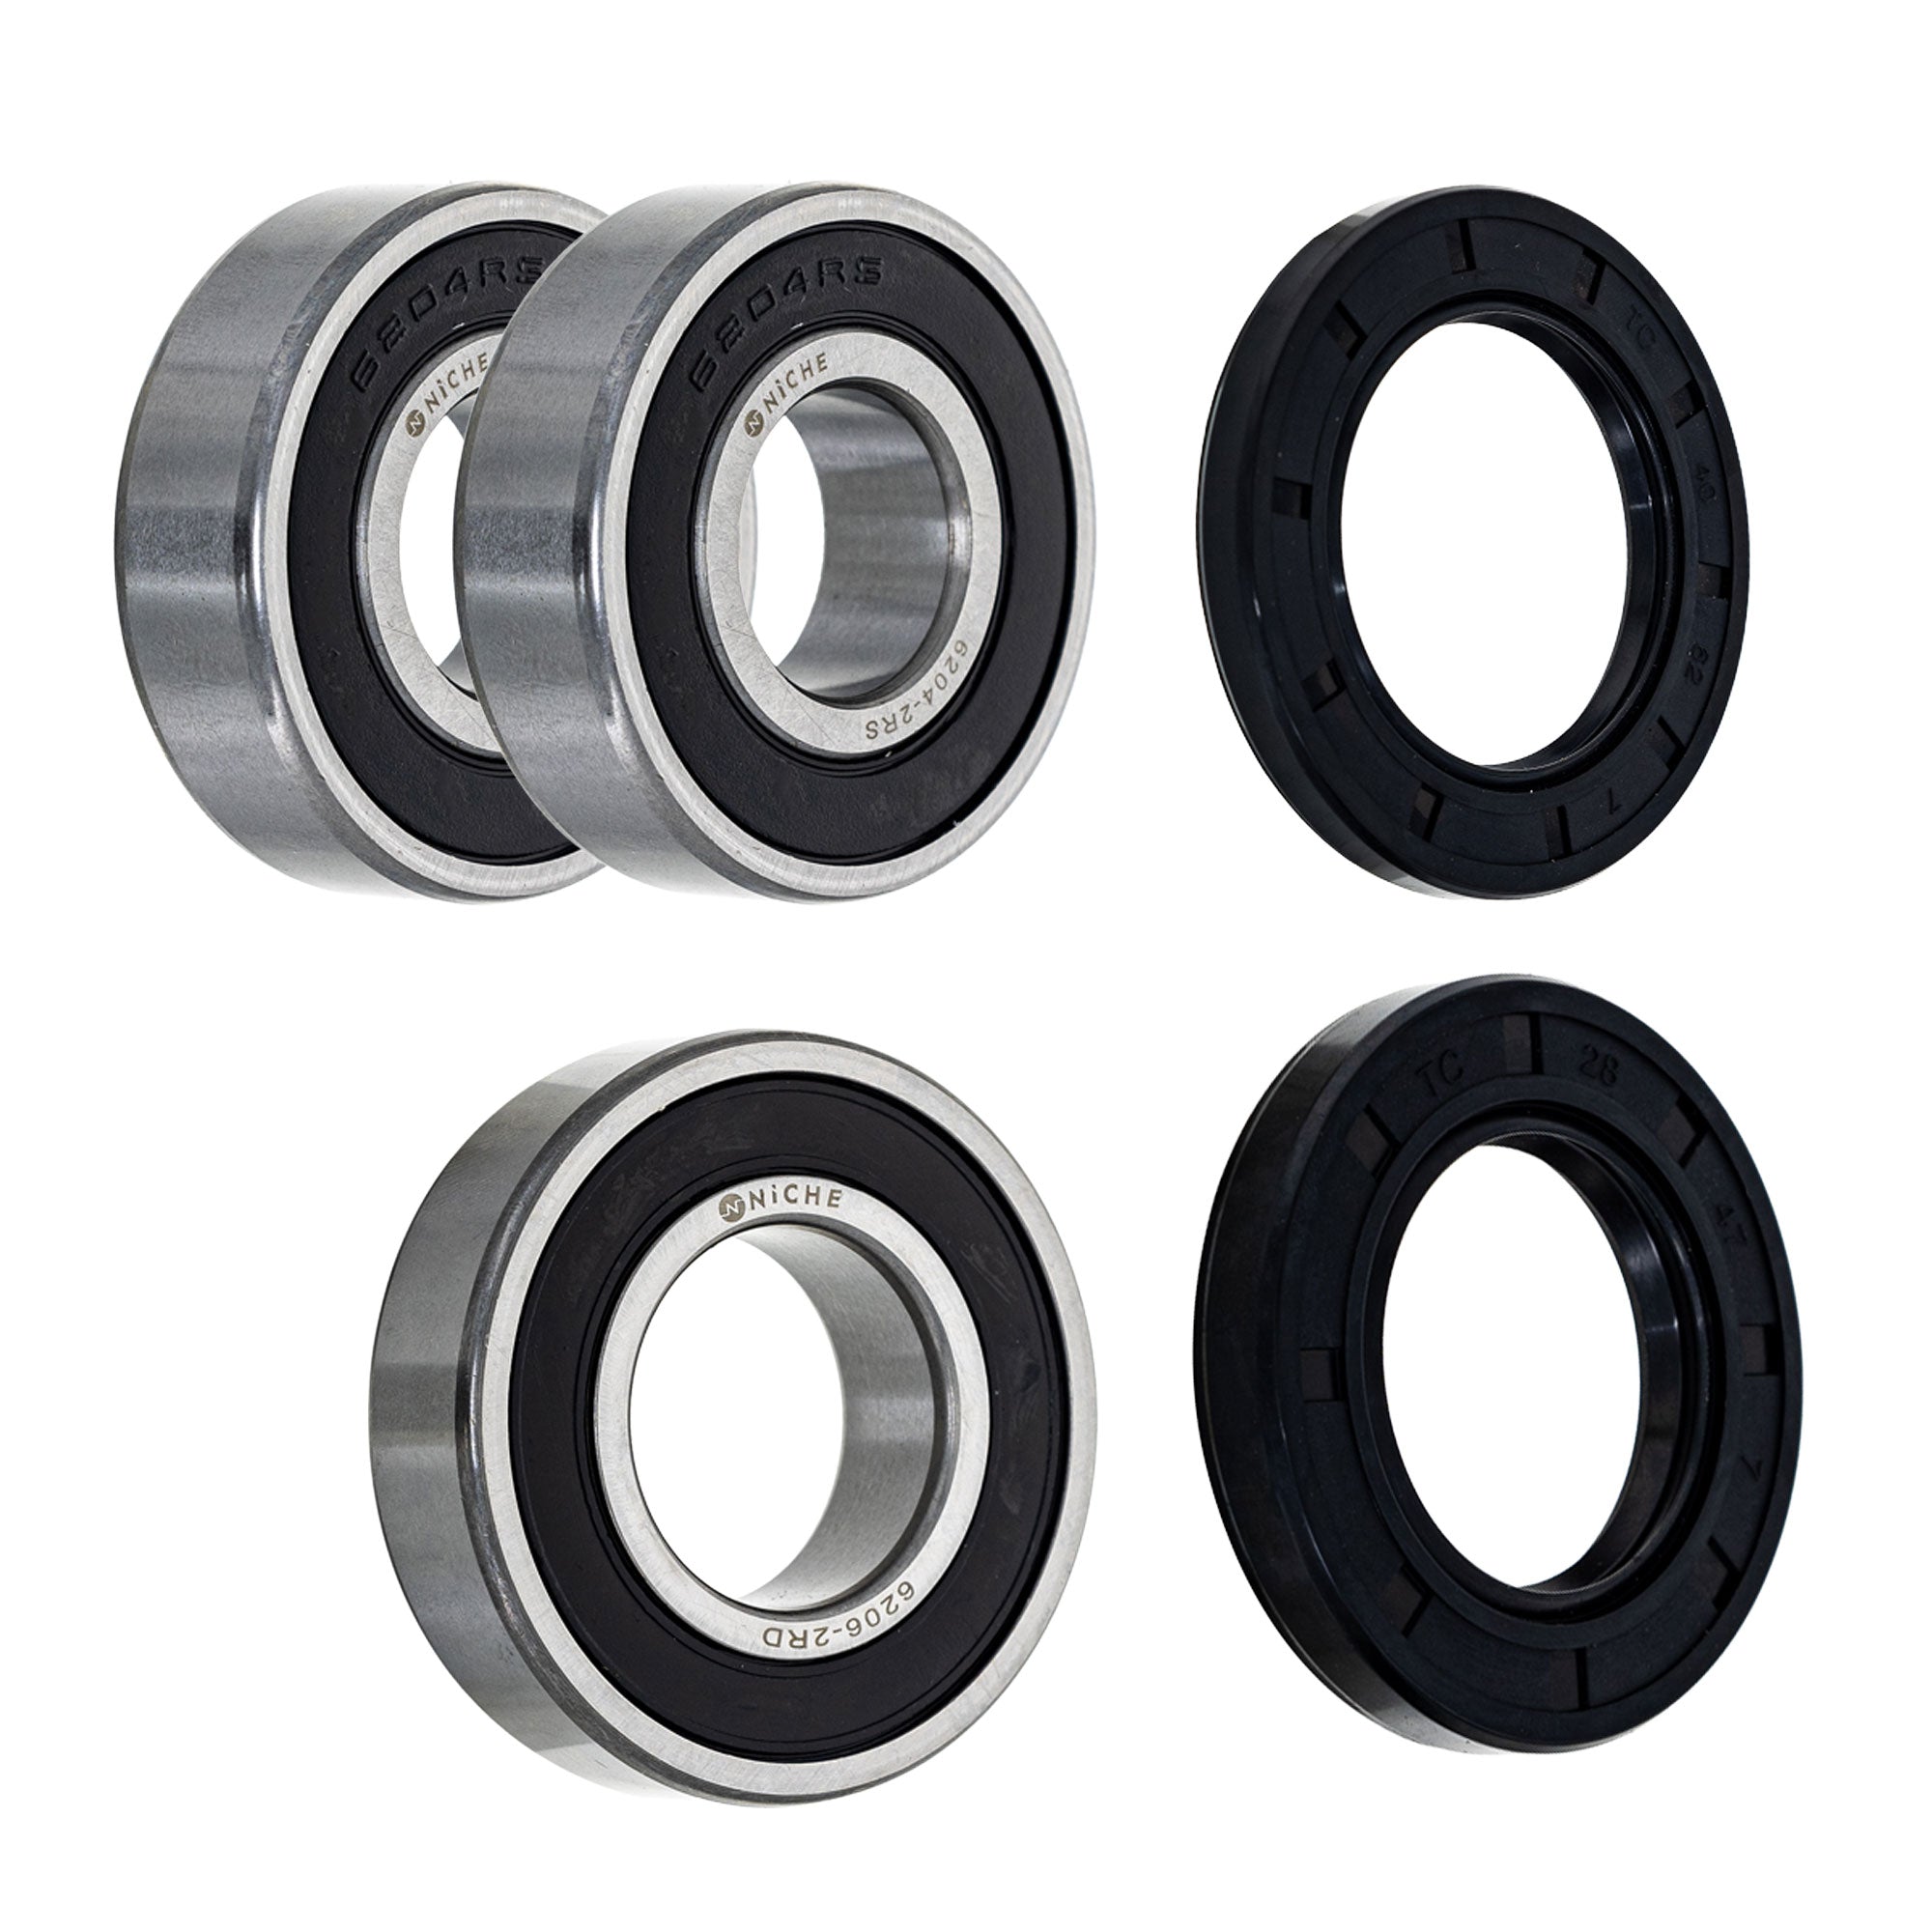 Wheel Bearing Seal Kit for zOTHER Ref No Tiger NICHE MK1008932